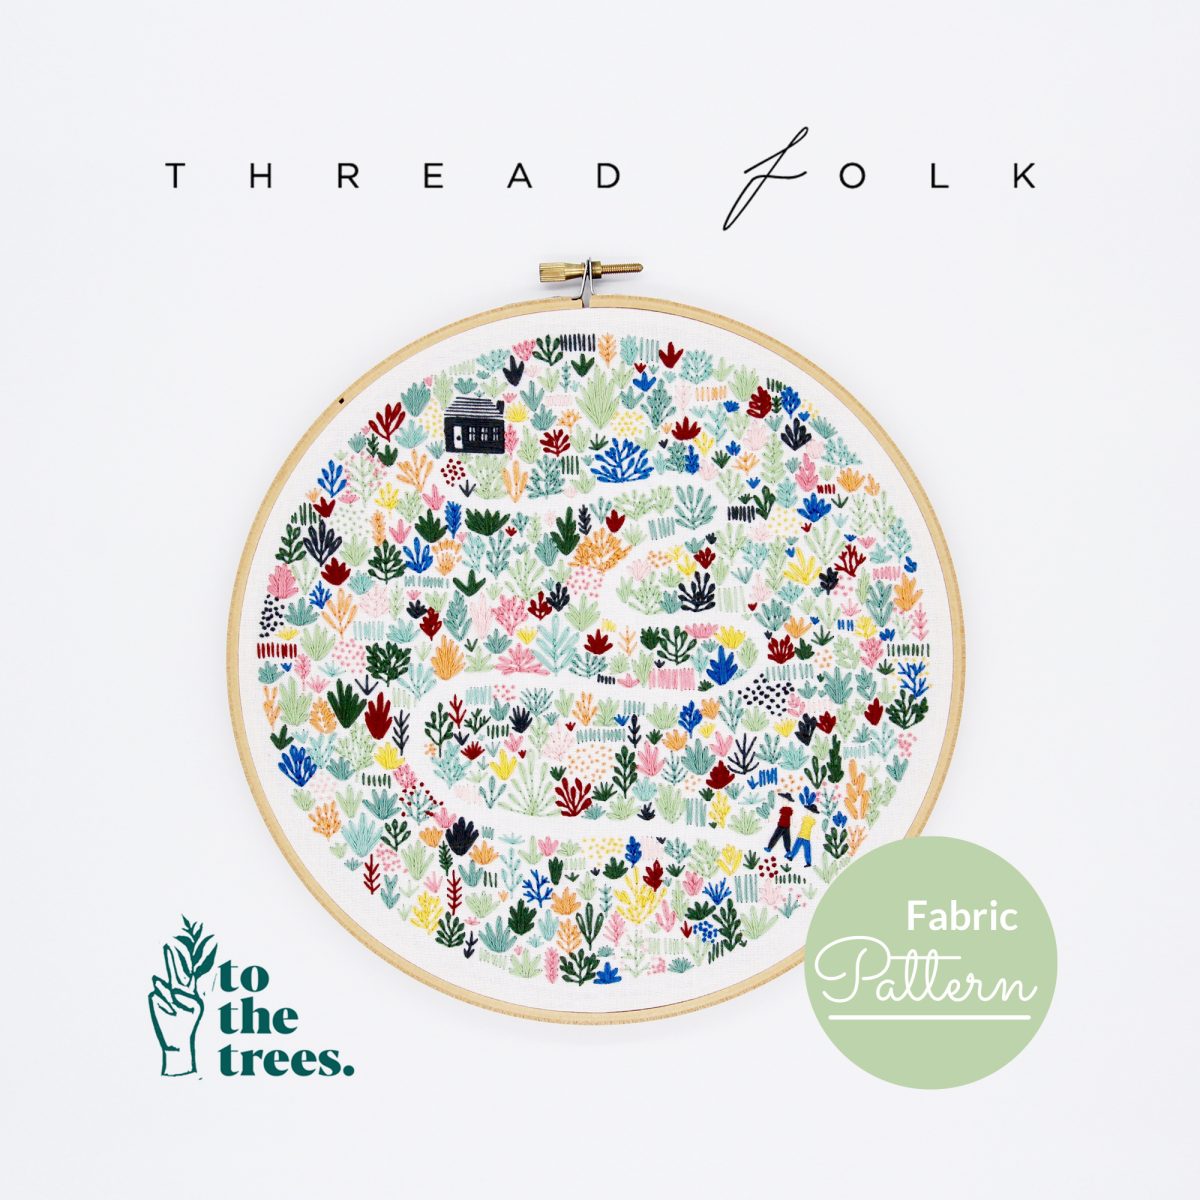 Pre Printed Fabric Pattern - By Threadfolk & To the Trees